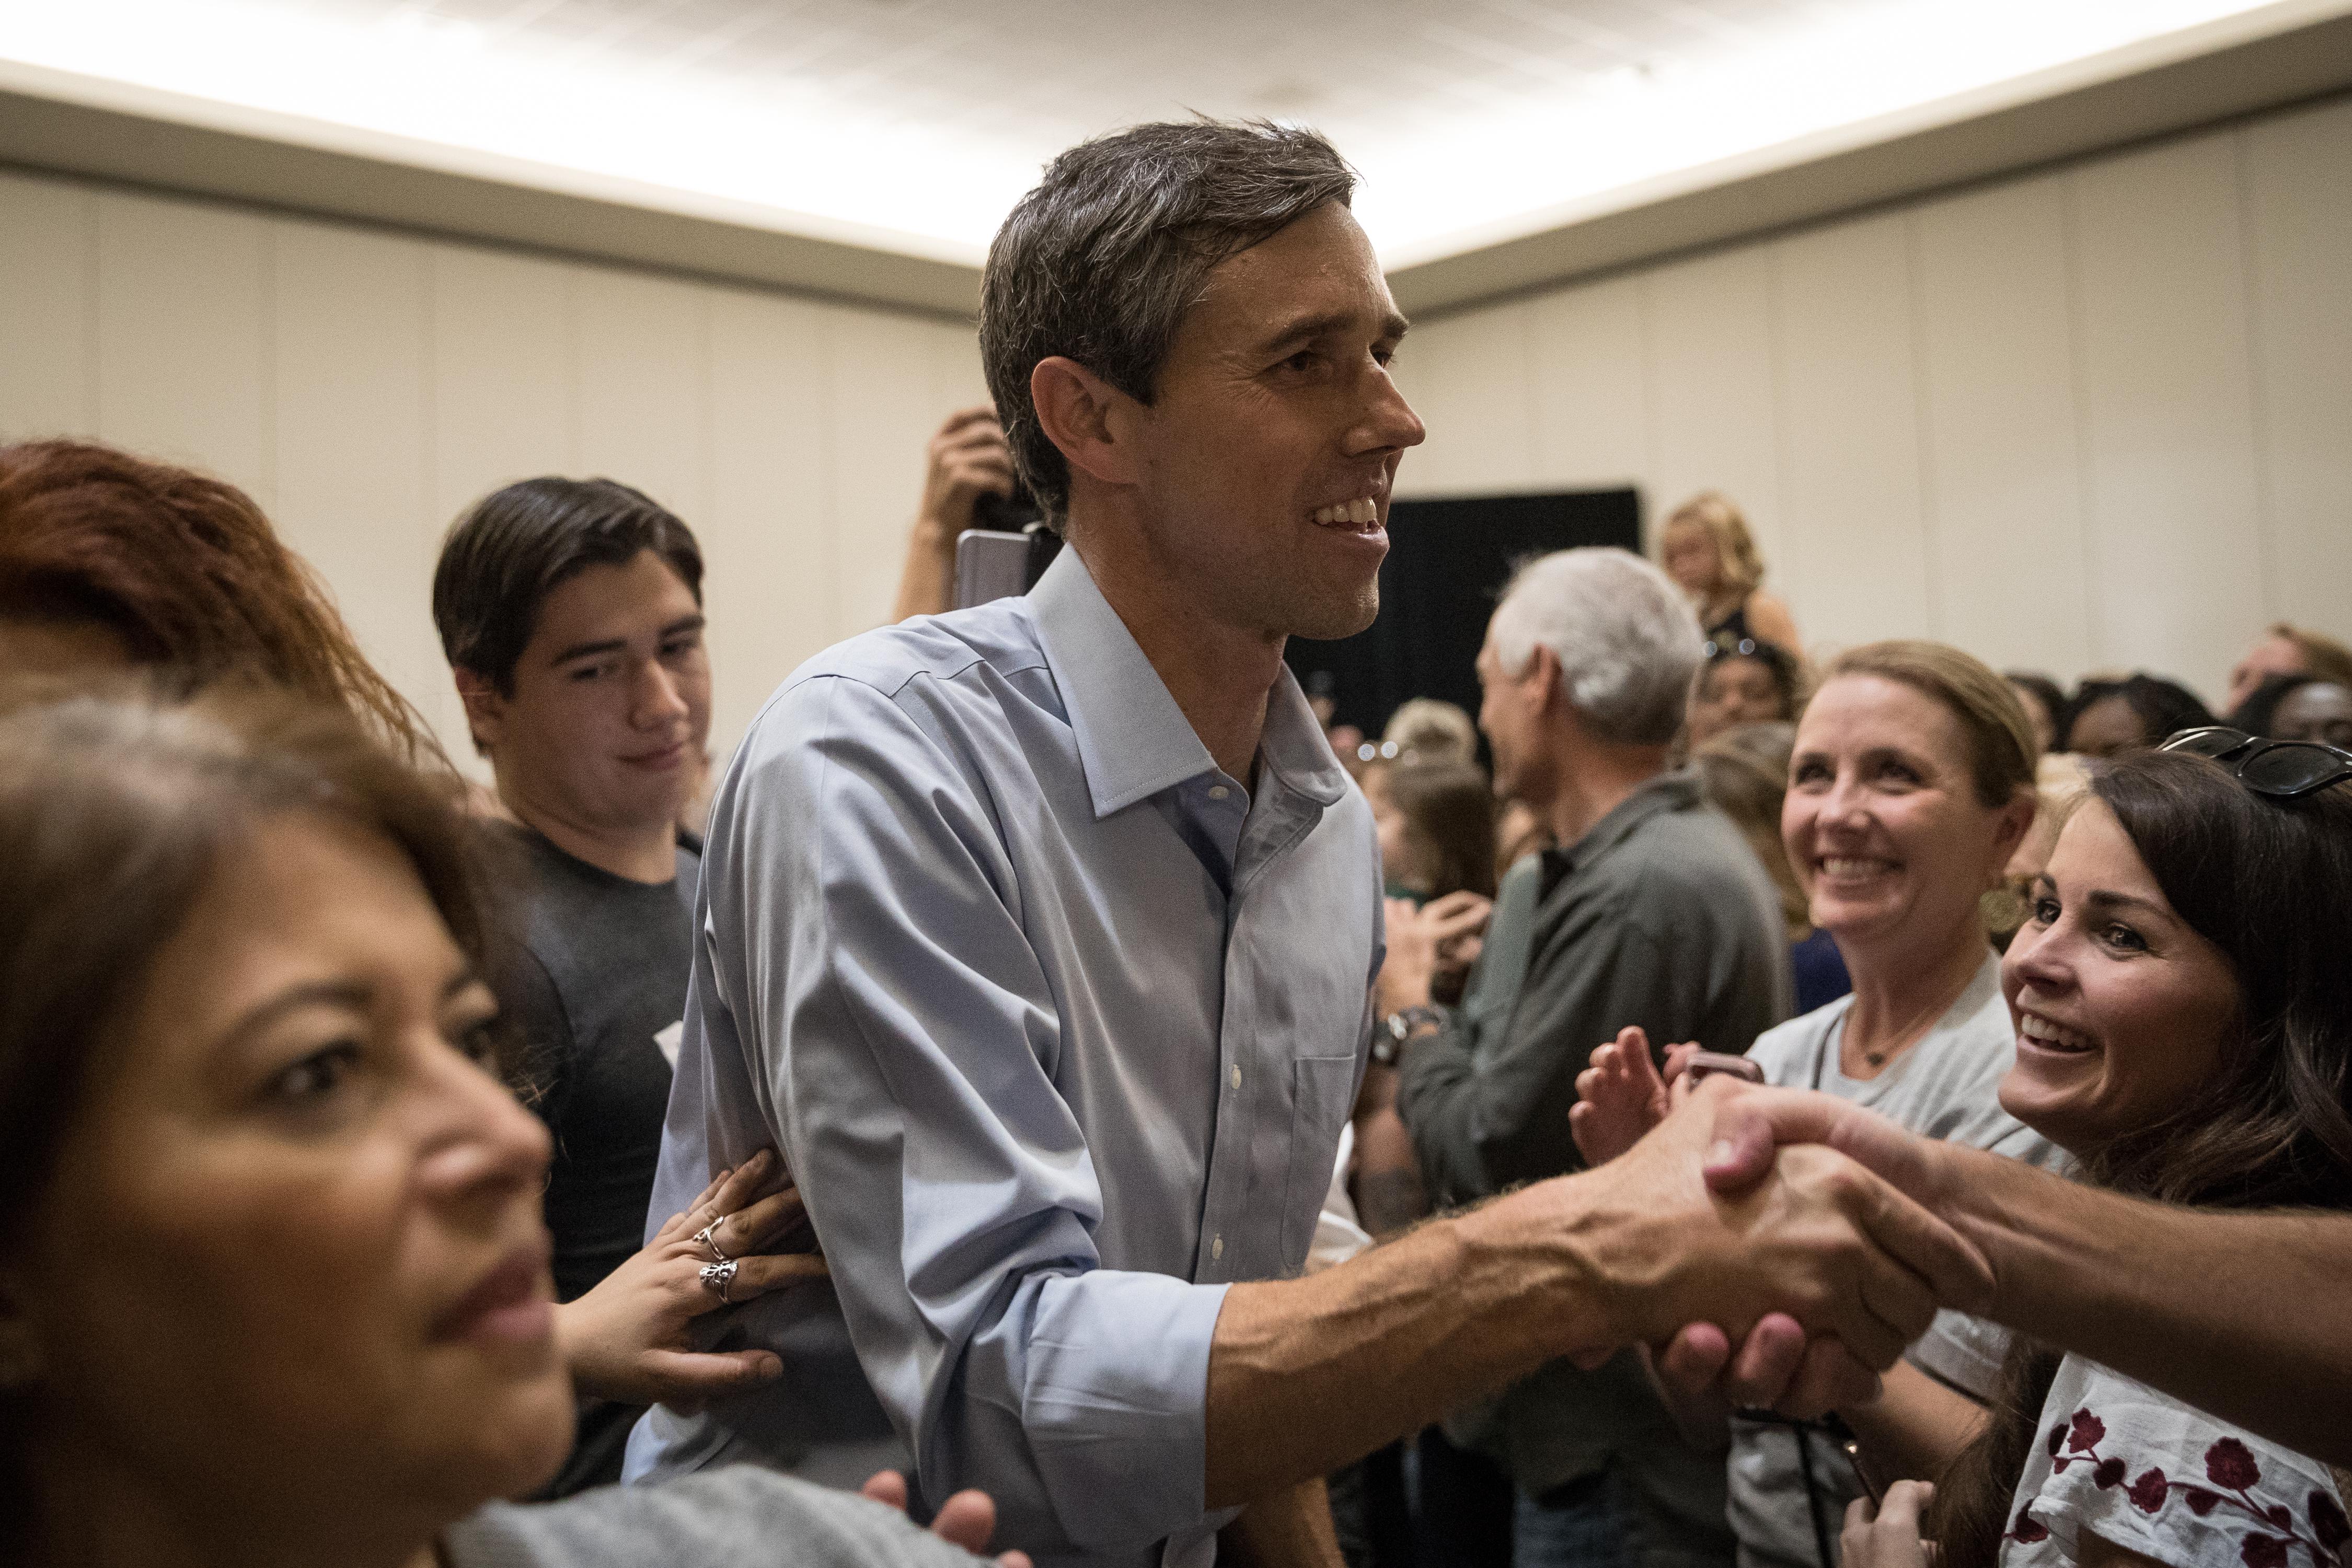 CONROE, TX - OCTOBER 21: Democratic Senate candidate Beto O'Rourke greets supporters at the conclusion of a campaign rally on October 21, 2018 in Conroe, Texas. O'Rourke is running against Sen. Ted Cruz (R-TX) in the midterm elections. (Photo by Loren Elliott/Getty Images)